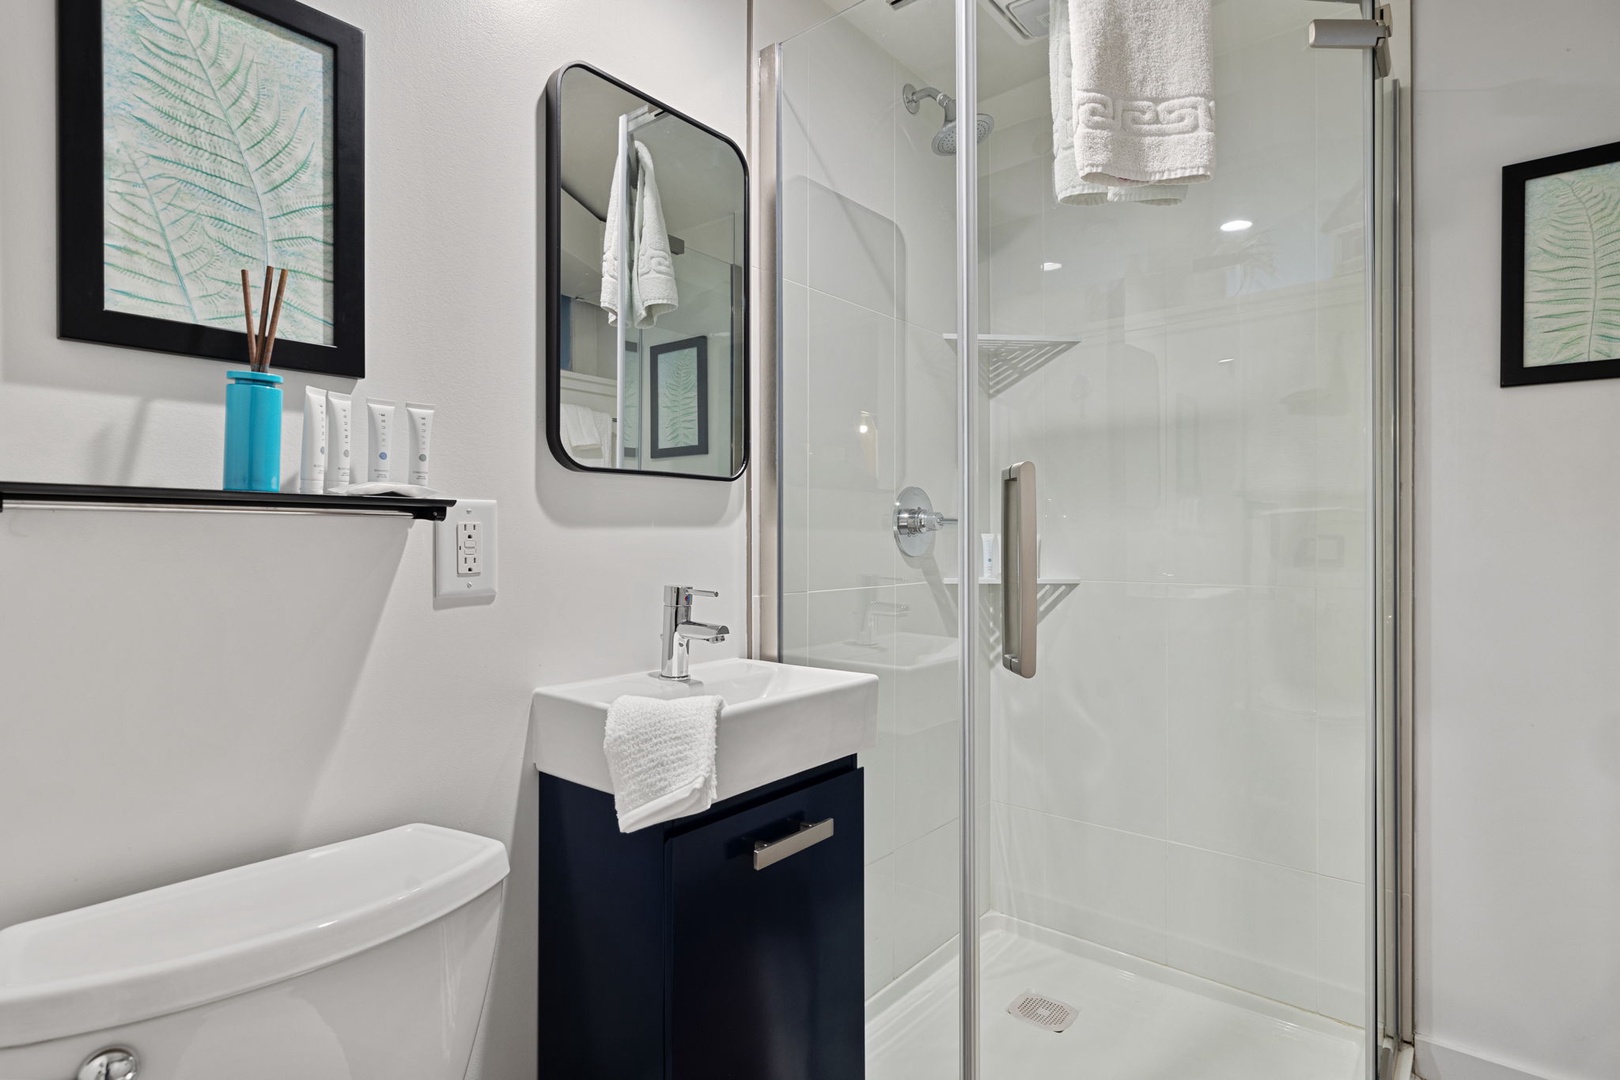 We love this super-spiffy bathroom with a walk-in shower.